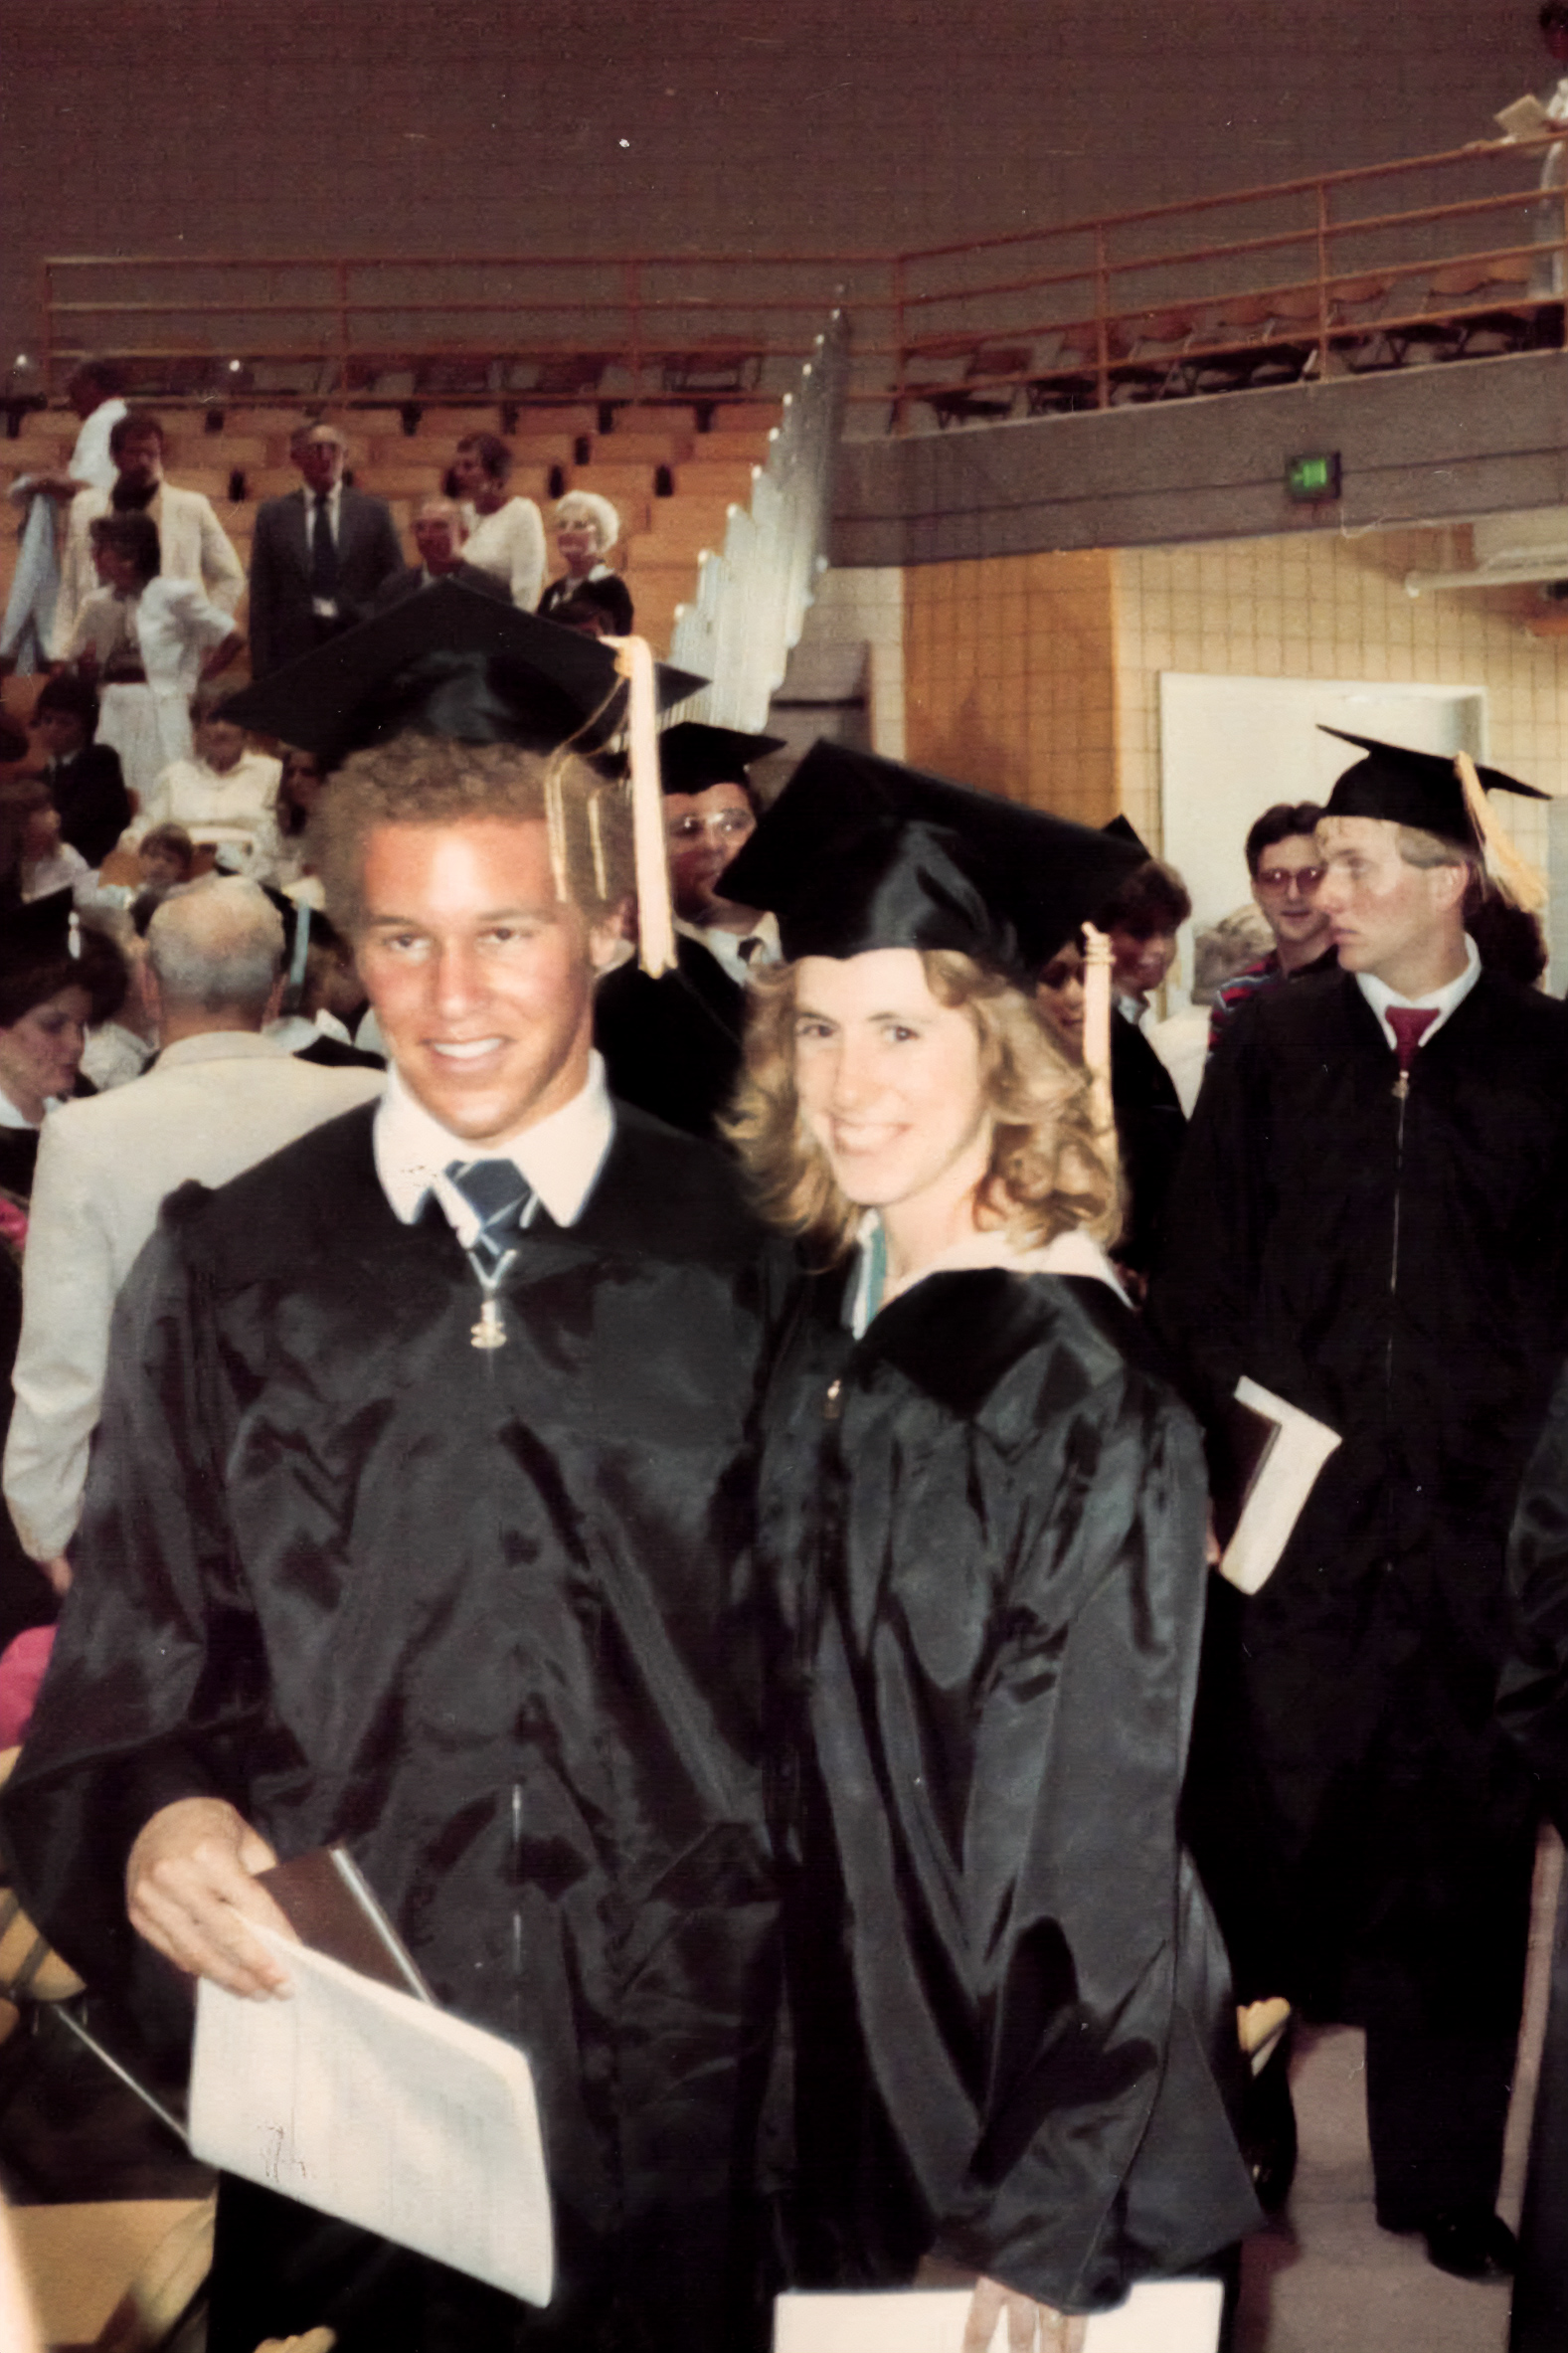 Robert Bryant and his future wife Joy pose in black graduation caps and gowns in crowded gymnasium with other graduates and attendees